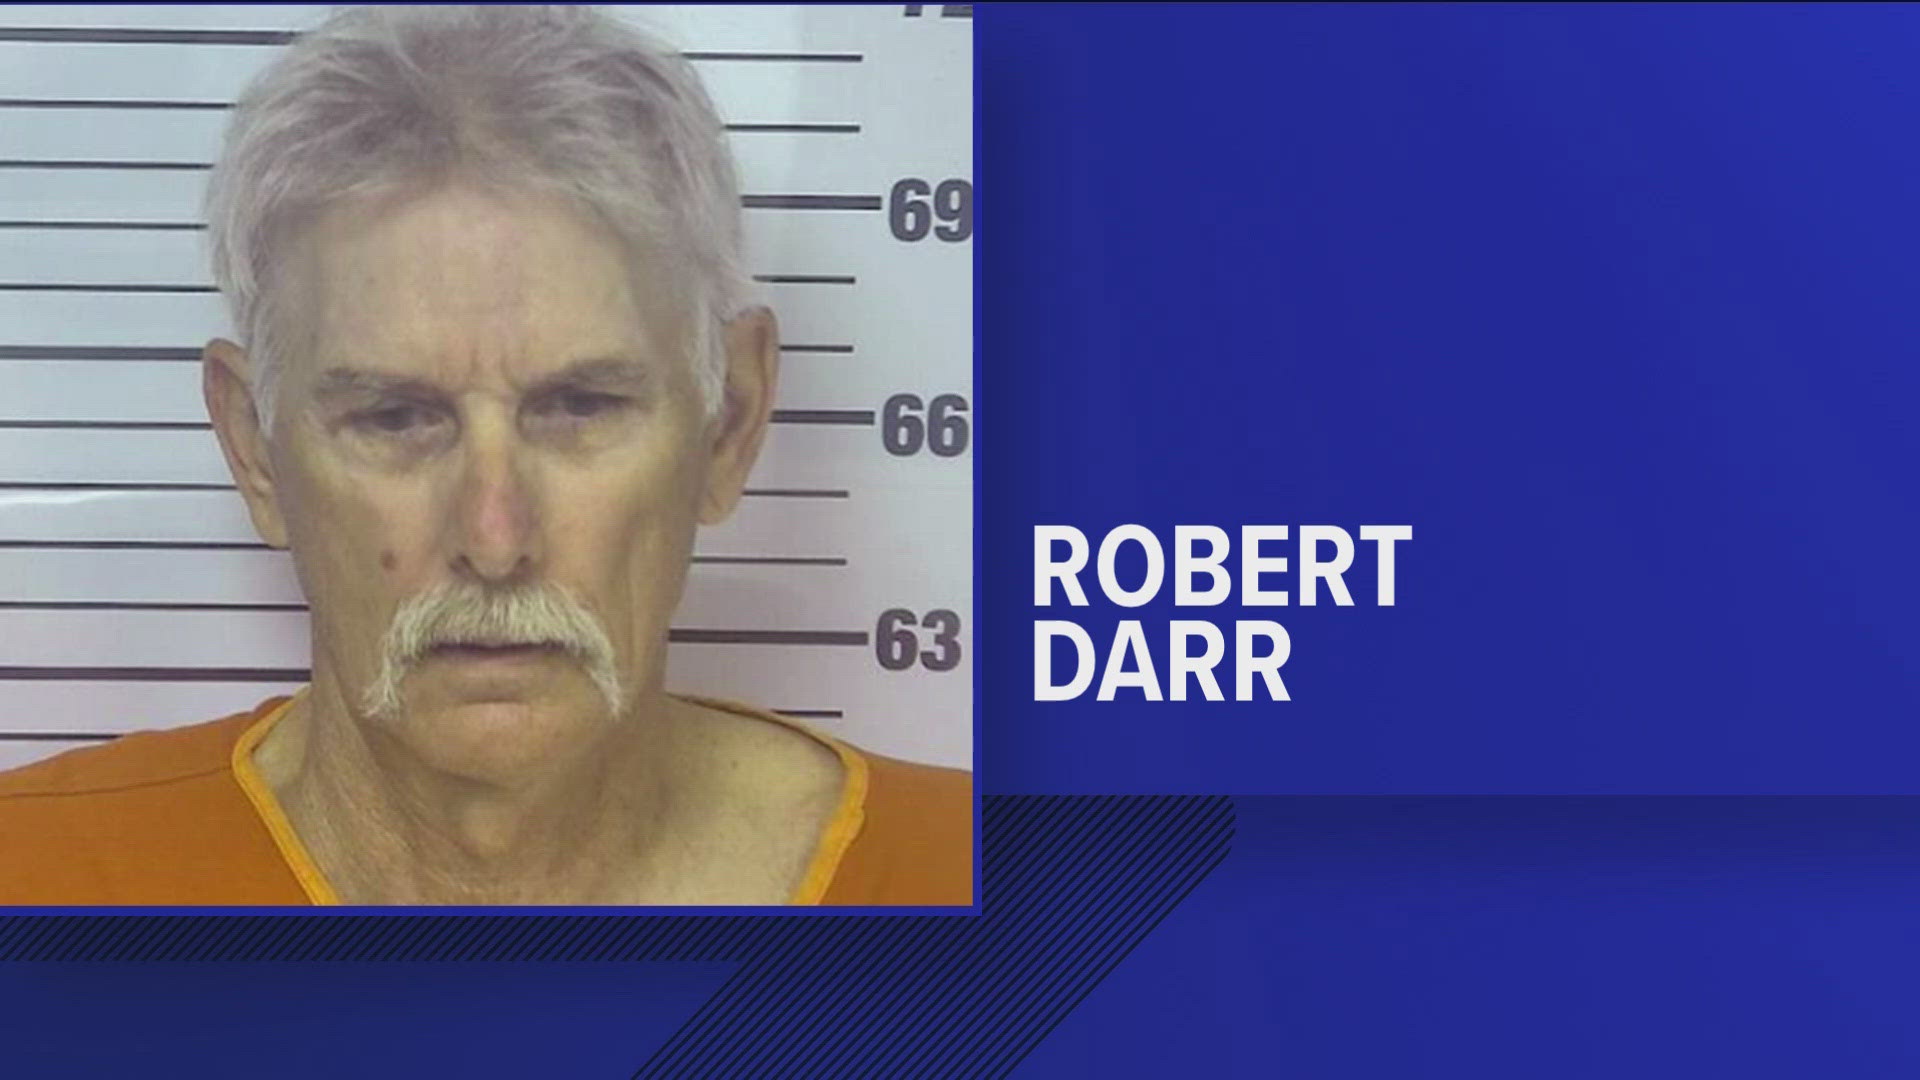 Robert Darr, 64, pleaded guilty on Monday to three counts of gross sexual imposition and two counts of disseminating matter harmful to juveniles.